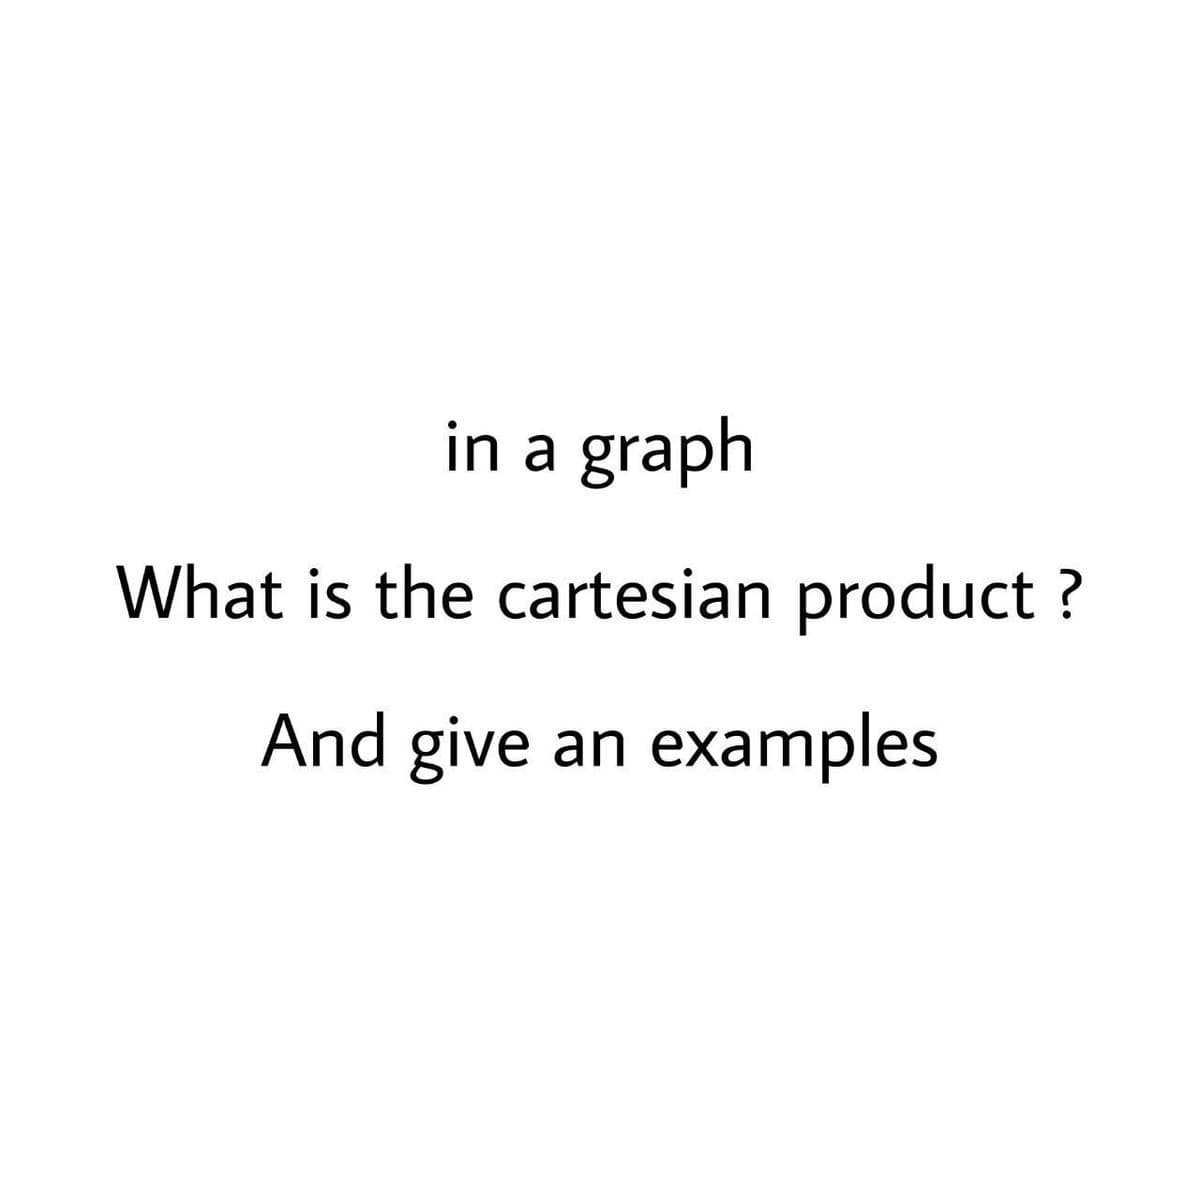 in a graph
What is the cartesian product?
And give an examples